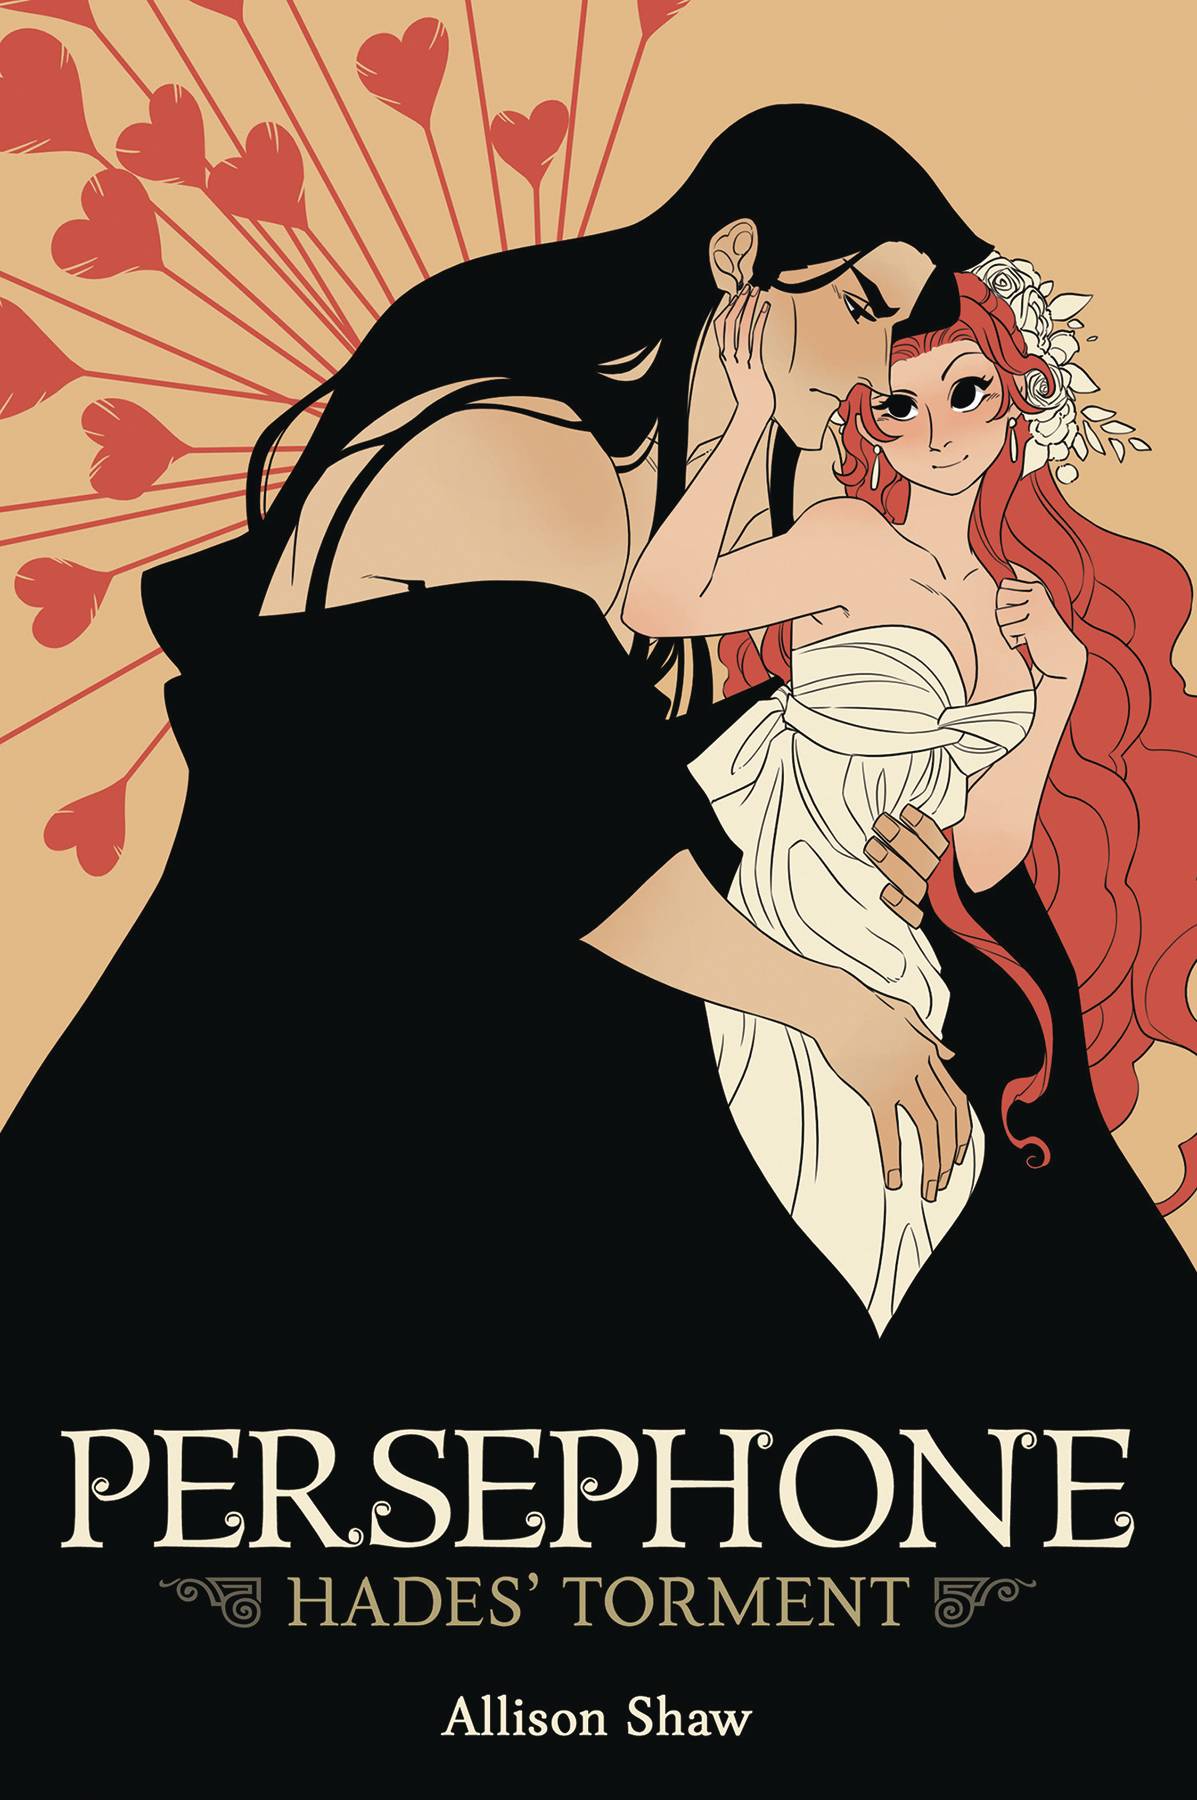 hades demeter and persephone